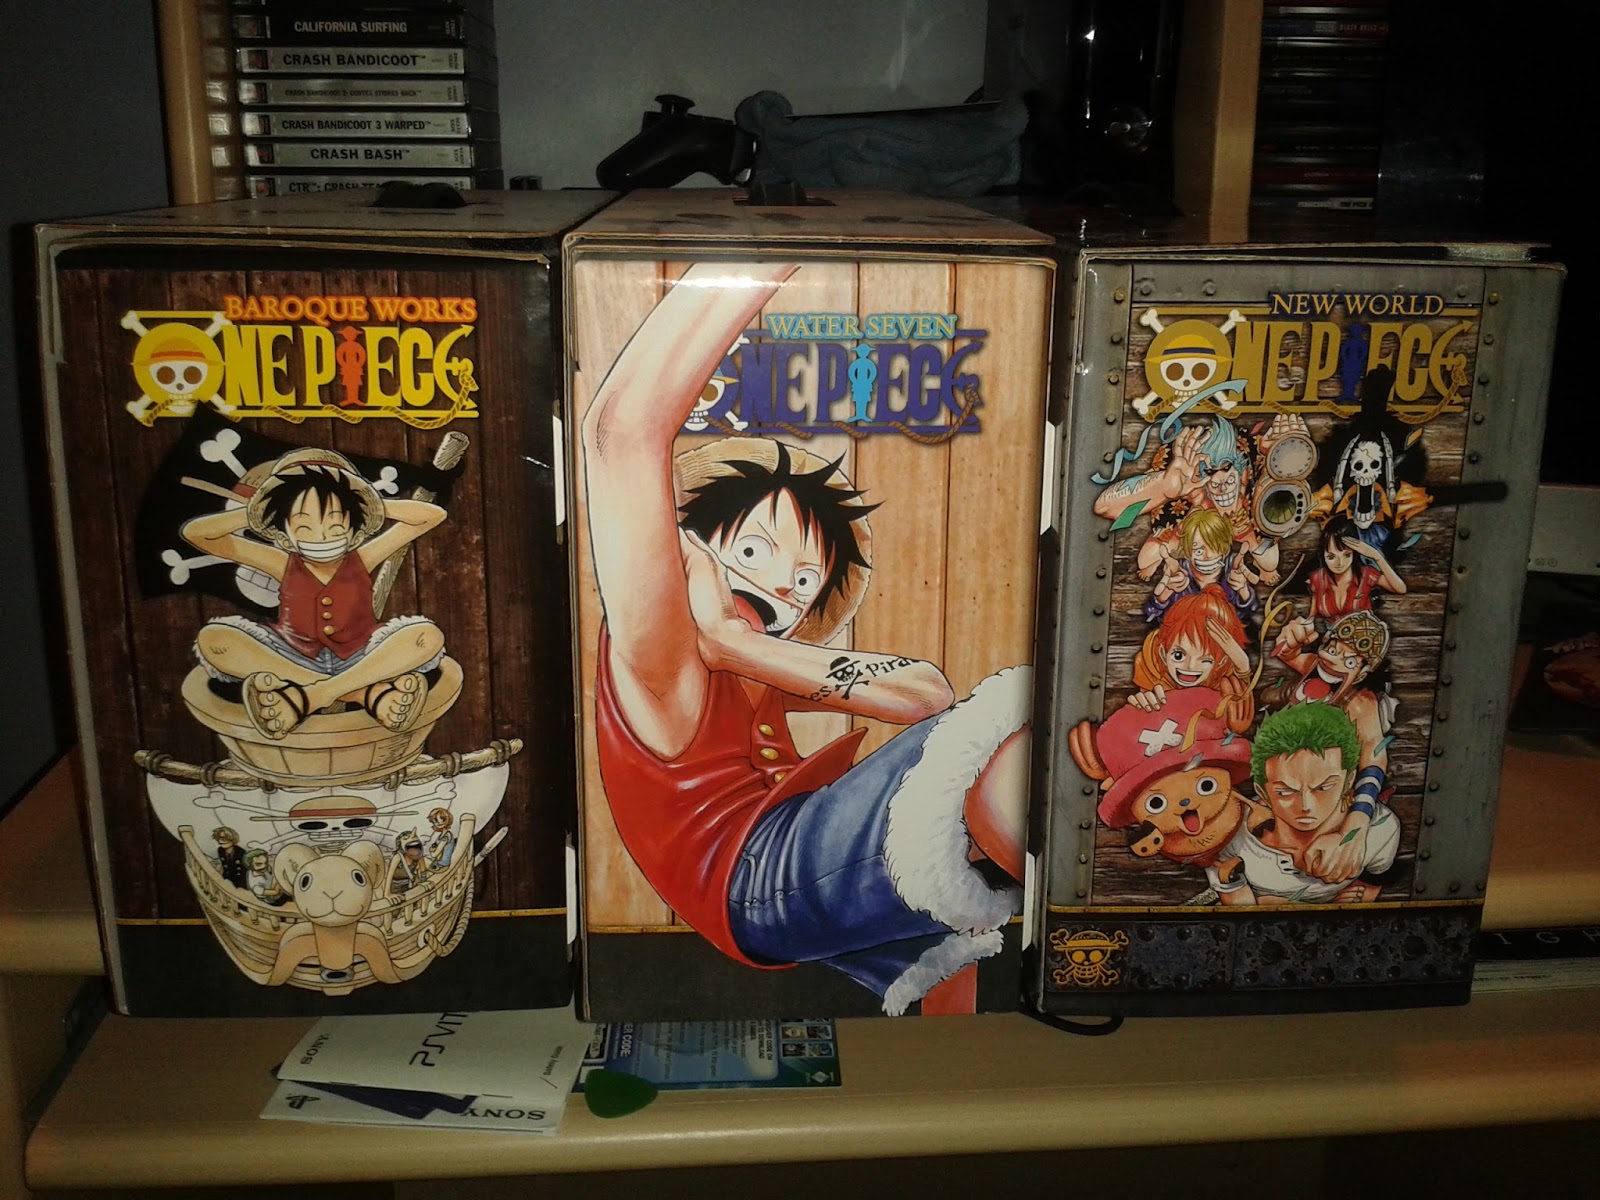 One Piece, King & Queen Unboxing